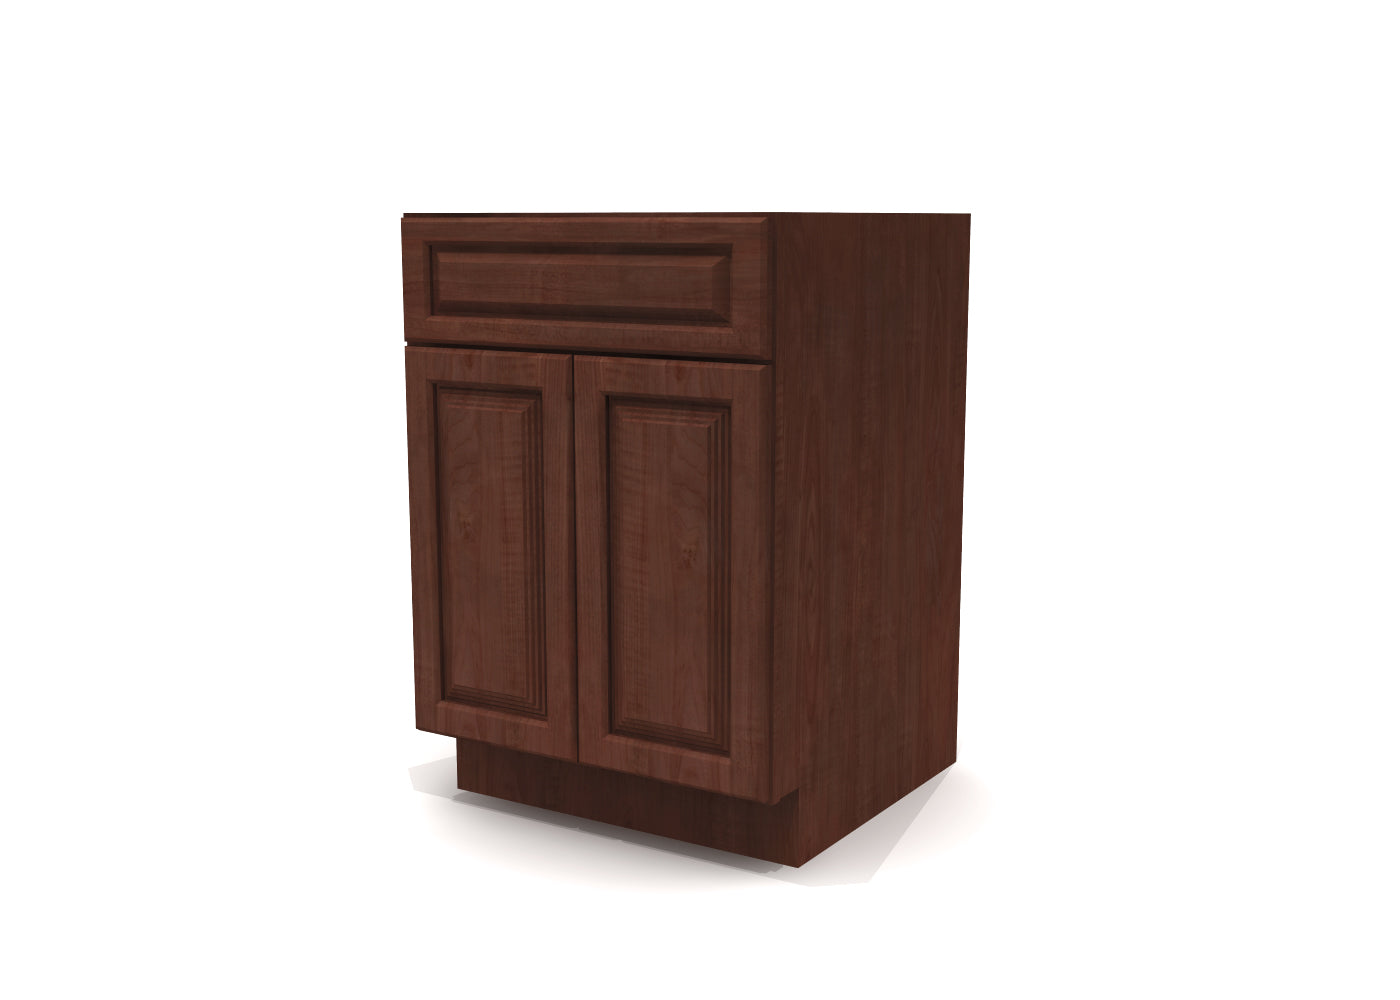 Base Double Door One Drawer 24" Wide Cherry Raised Panel Cabinet